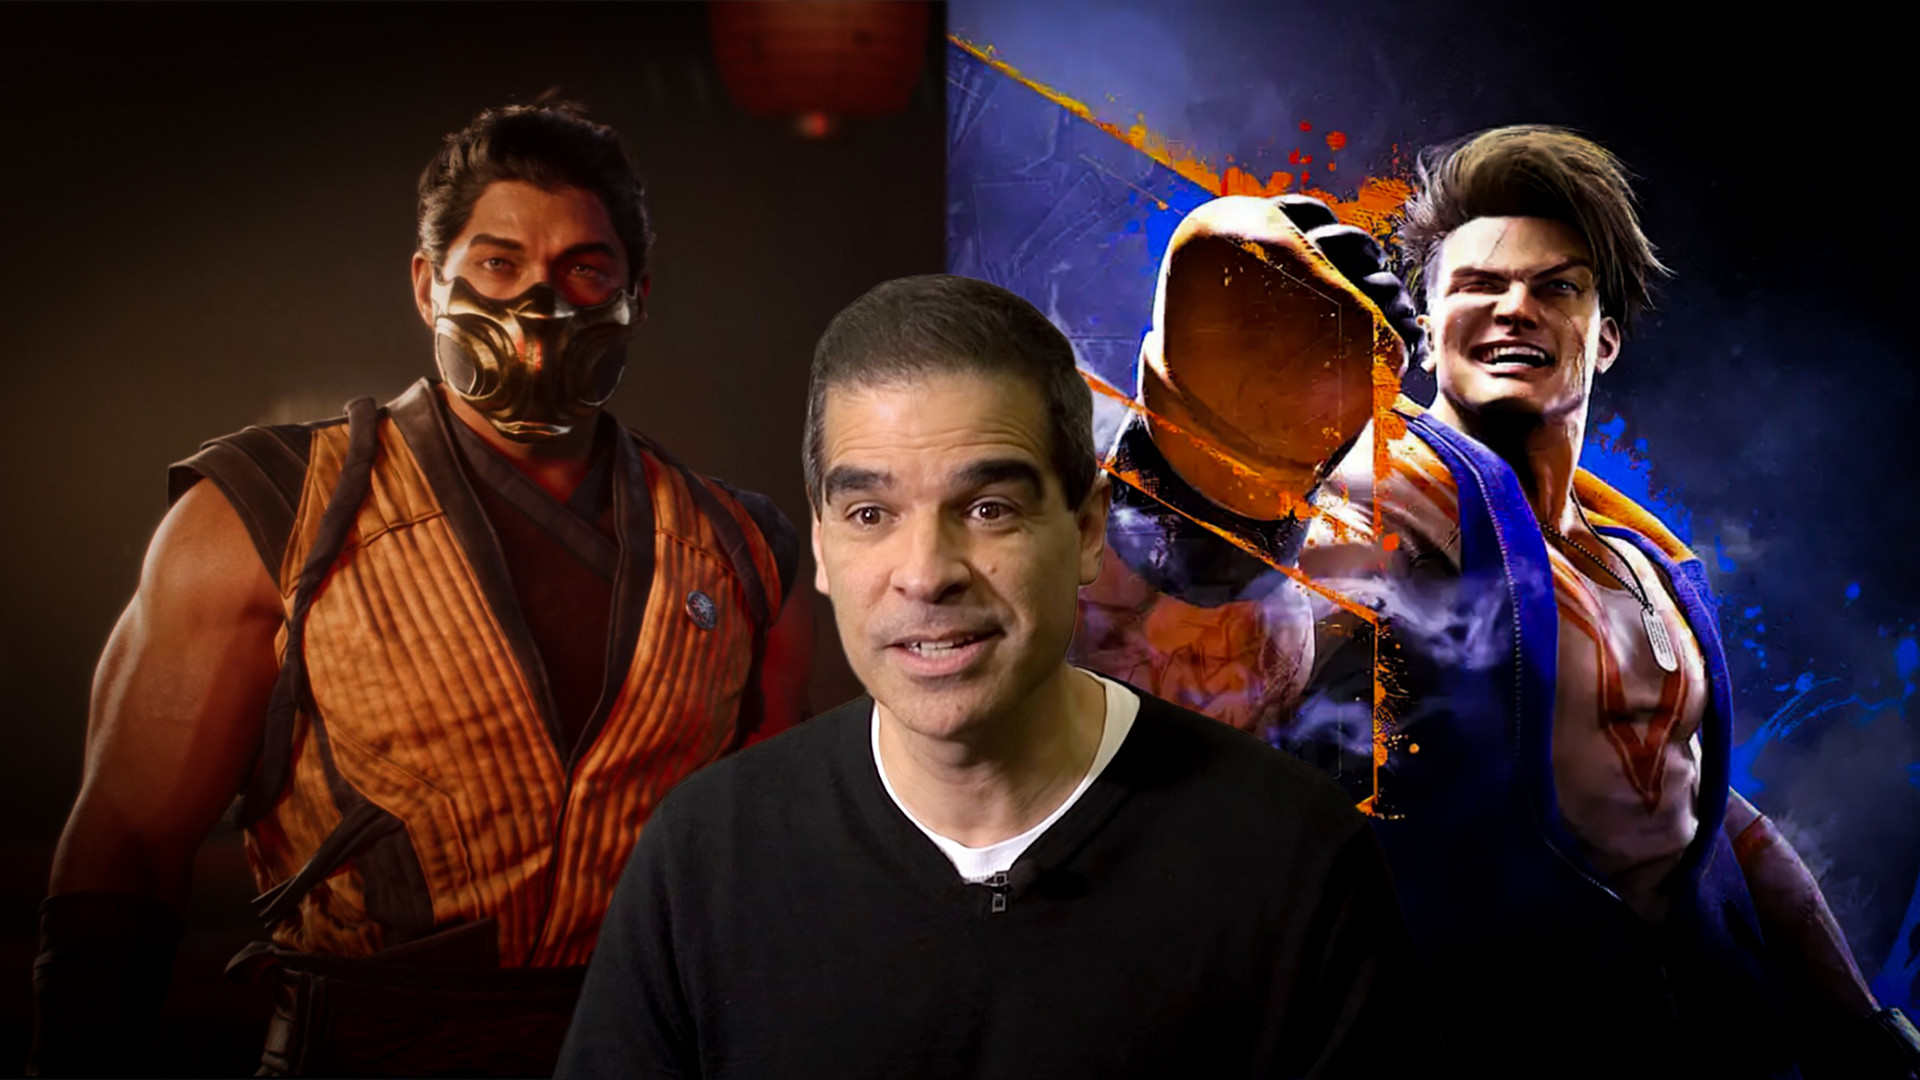 Ed Boon Says NetherRealm's Next Game Is Likely Injustice 3 Or Mortal Kombat  12